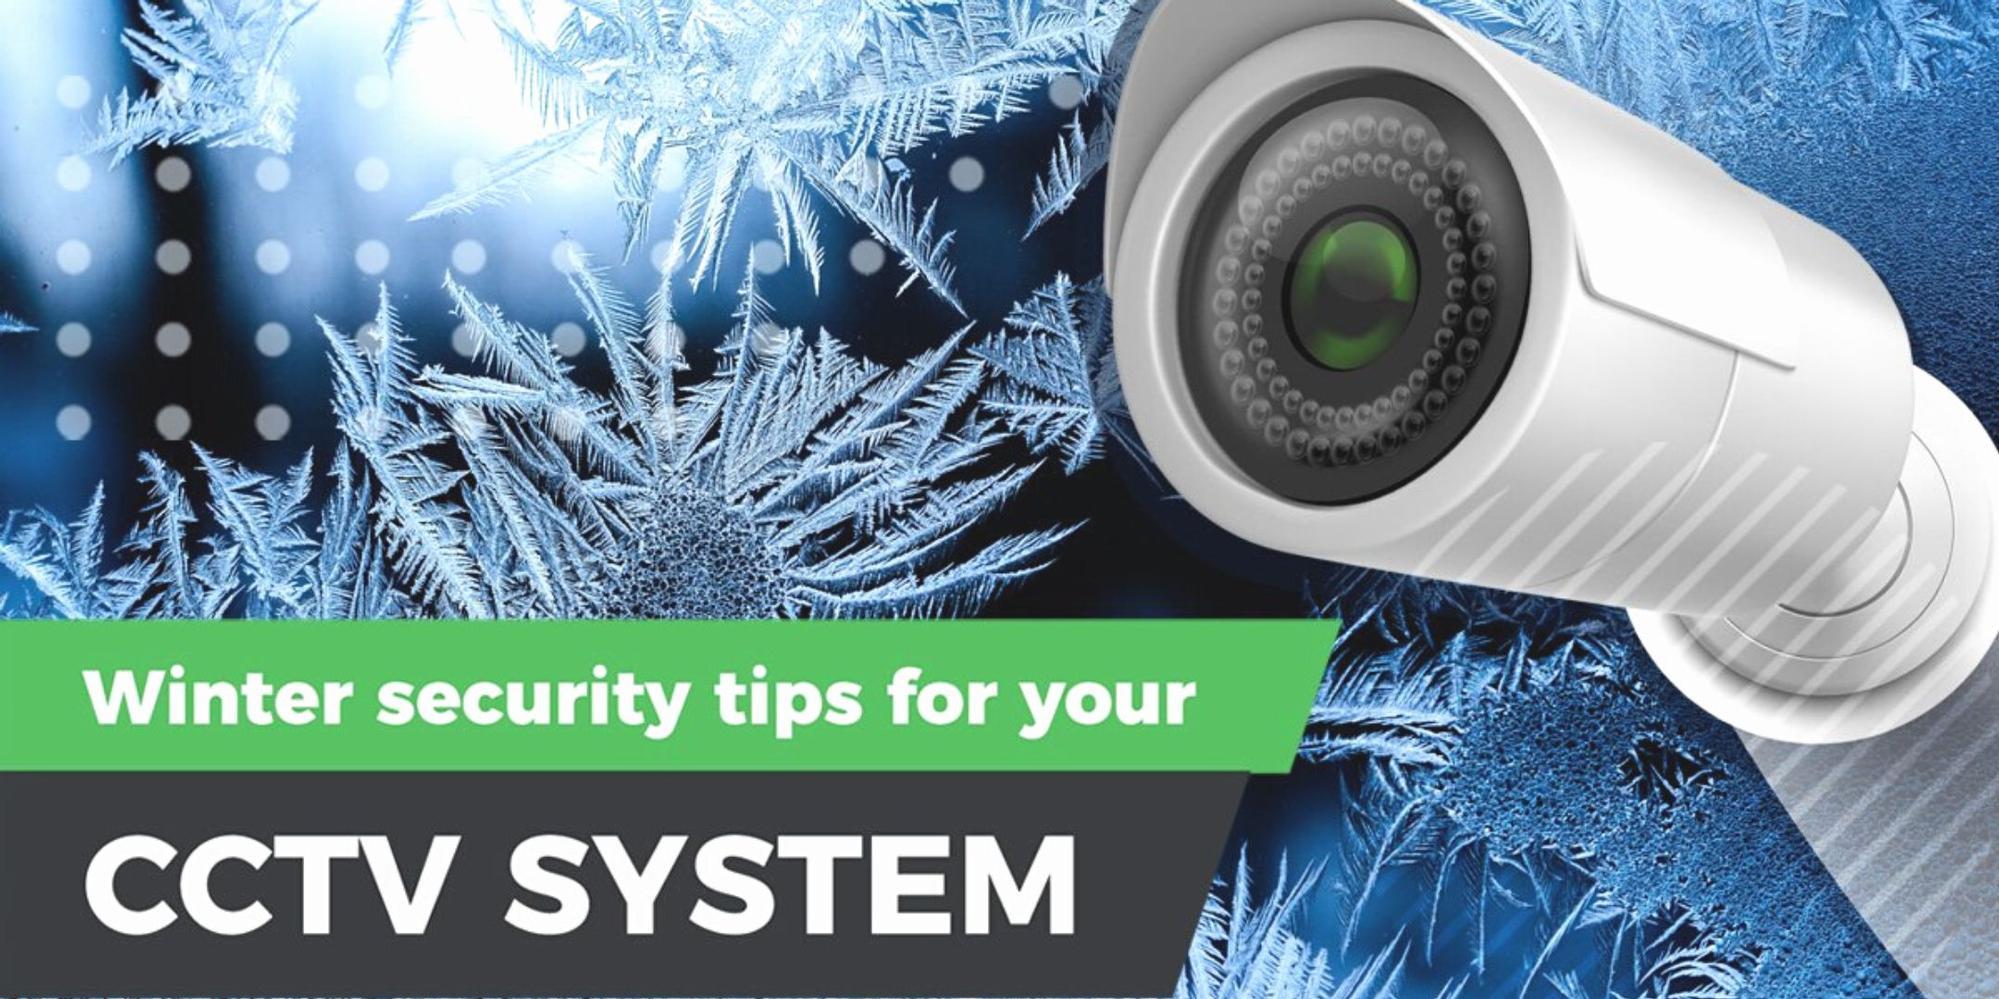 Winter security tips for your CCTV system